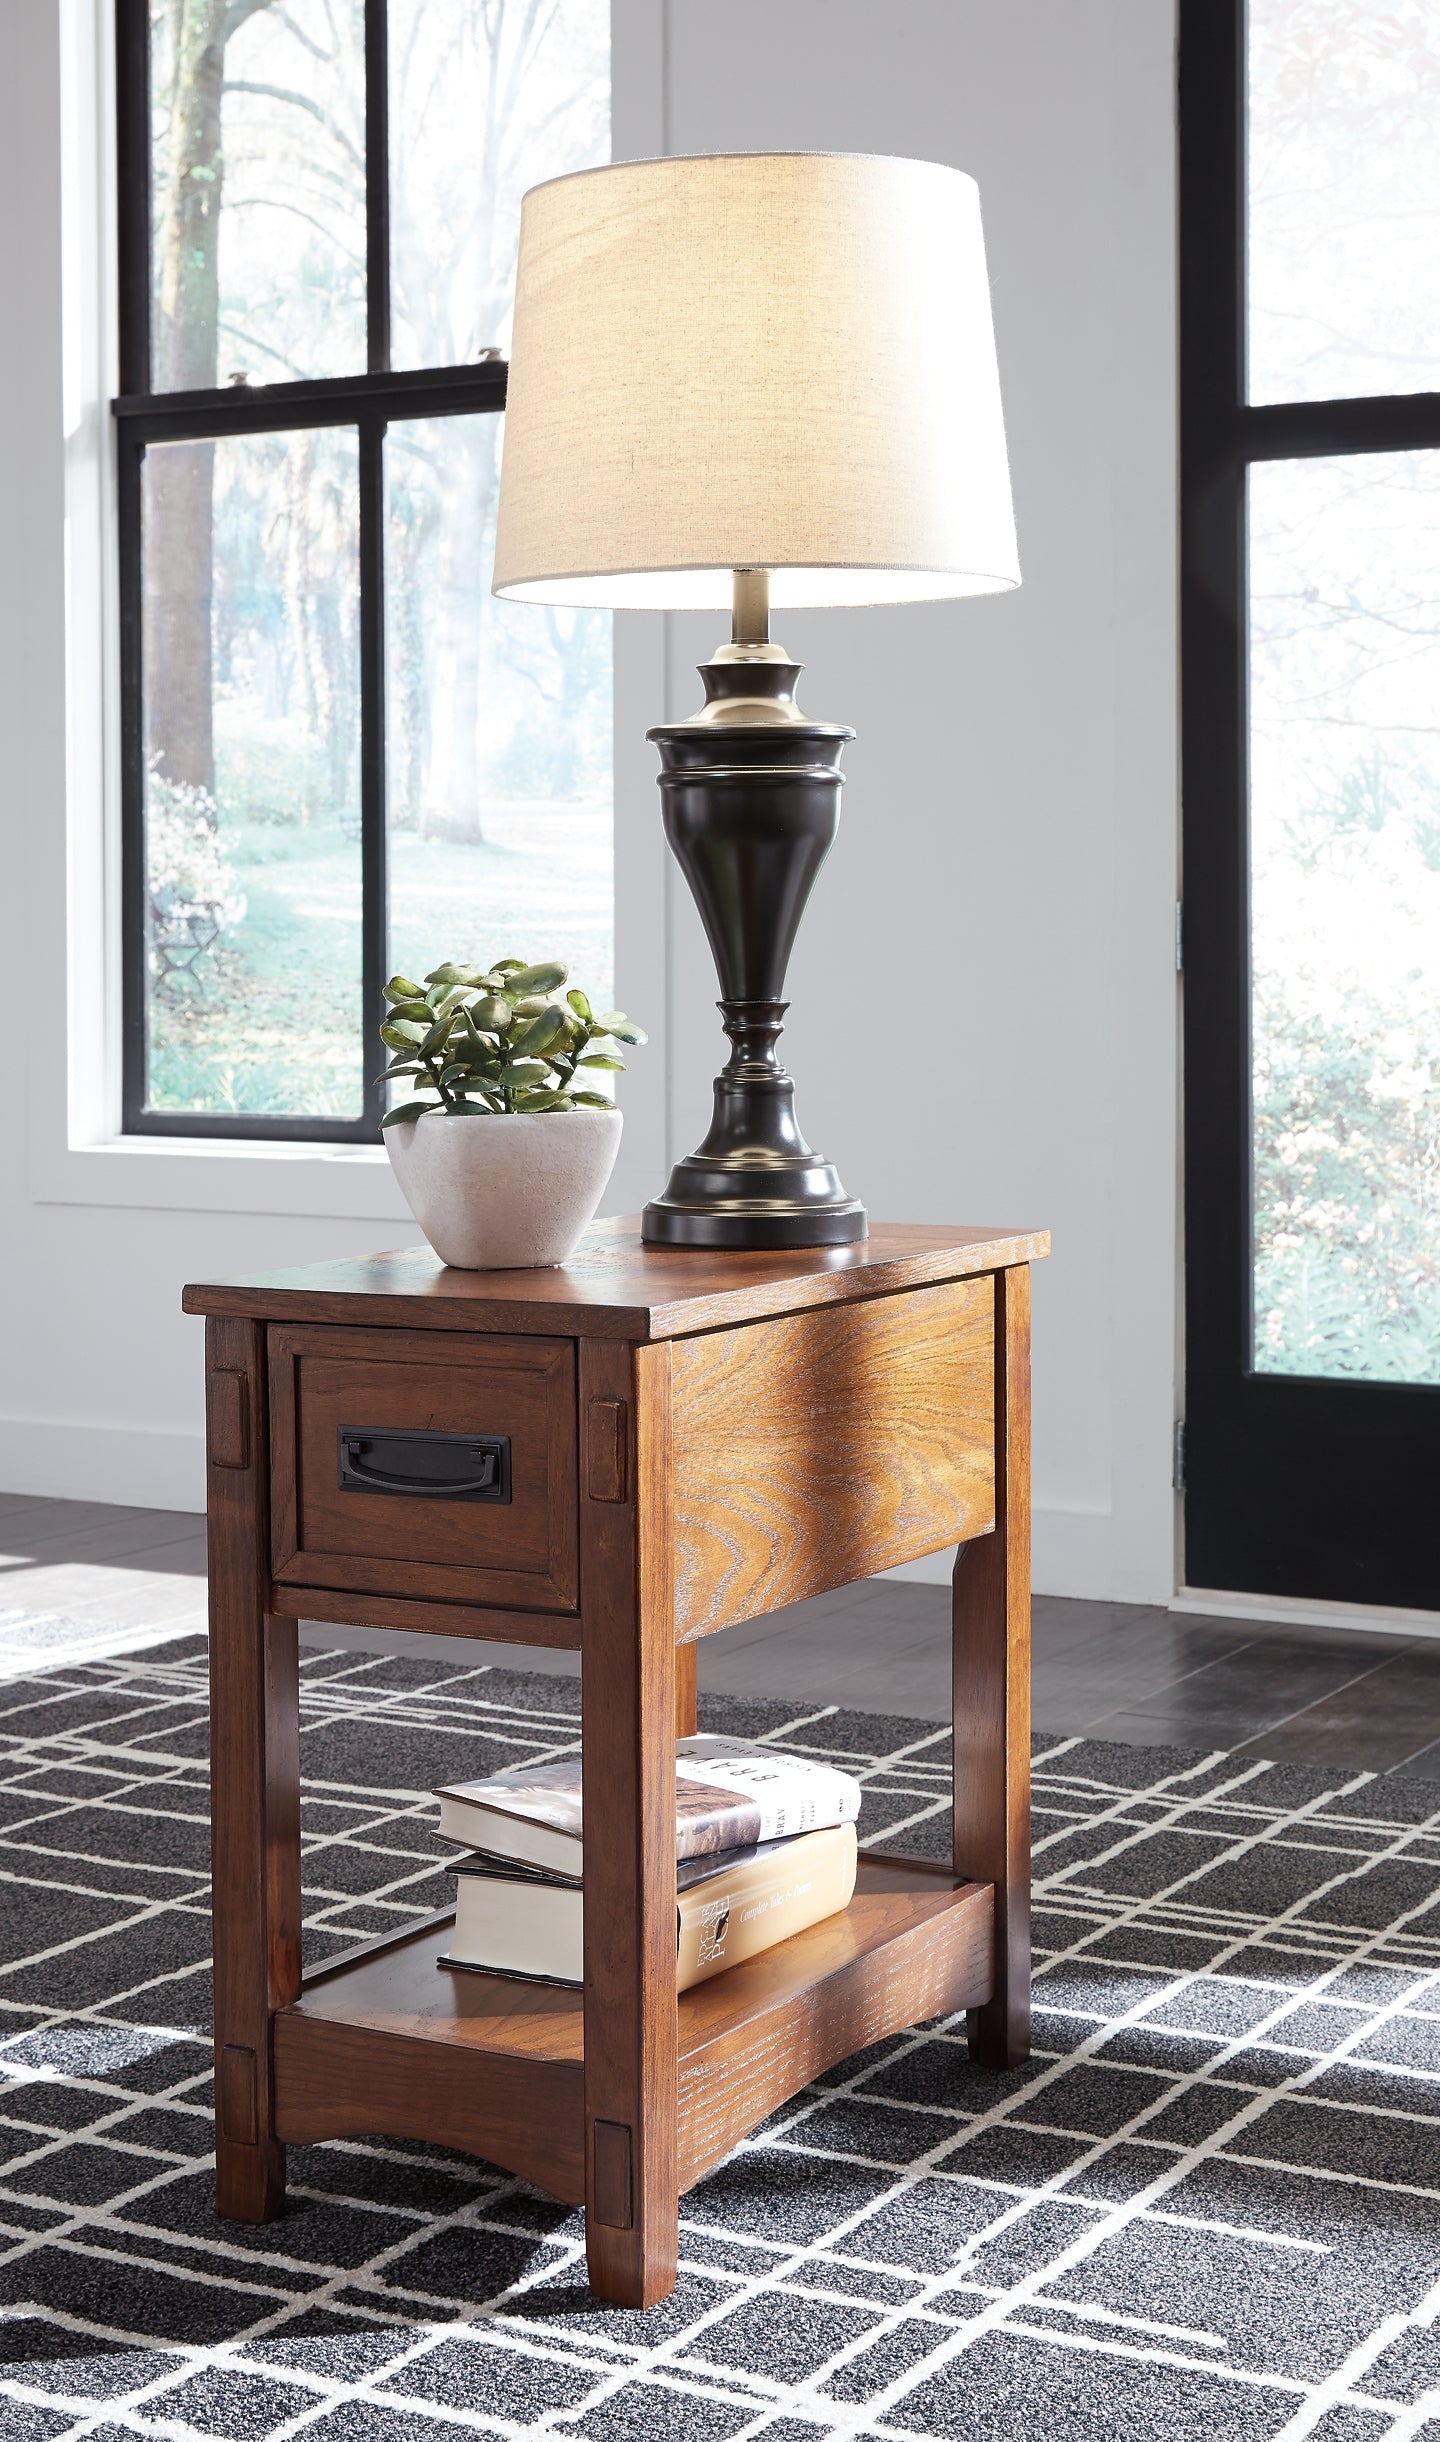 Breegin 2 End Tables Rent Wise Rent To Own Jacksonville, Florida